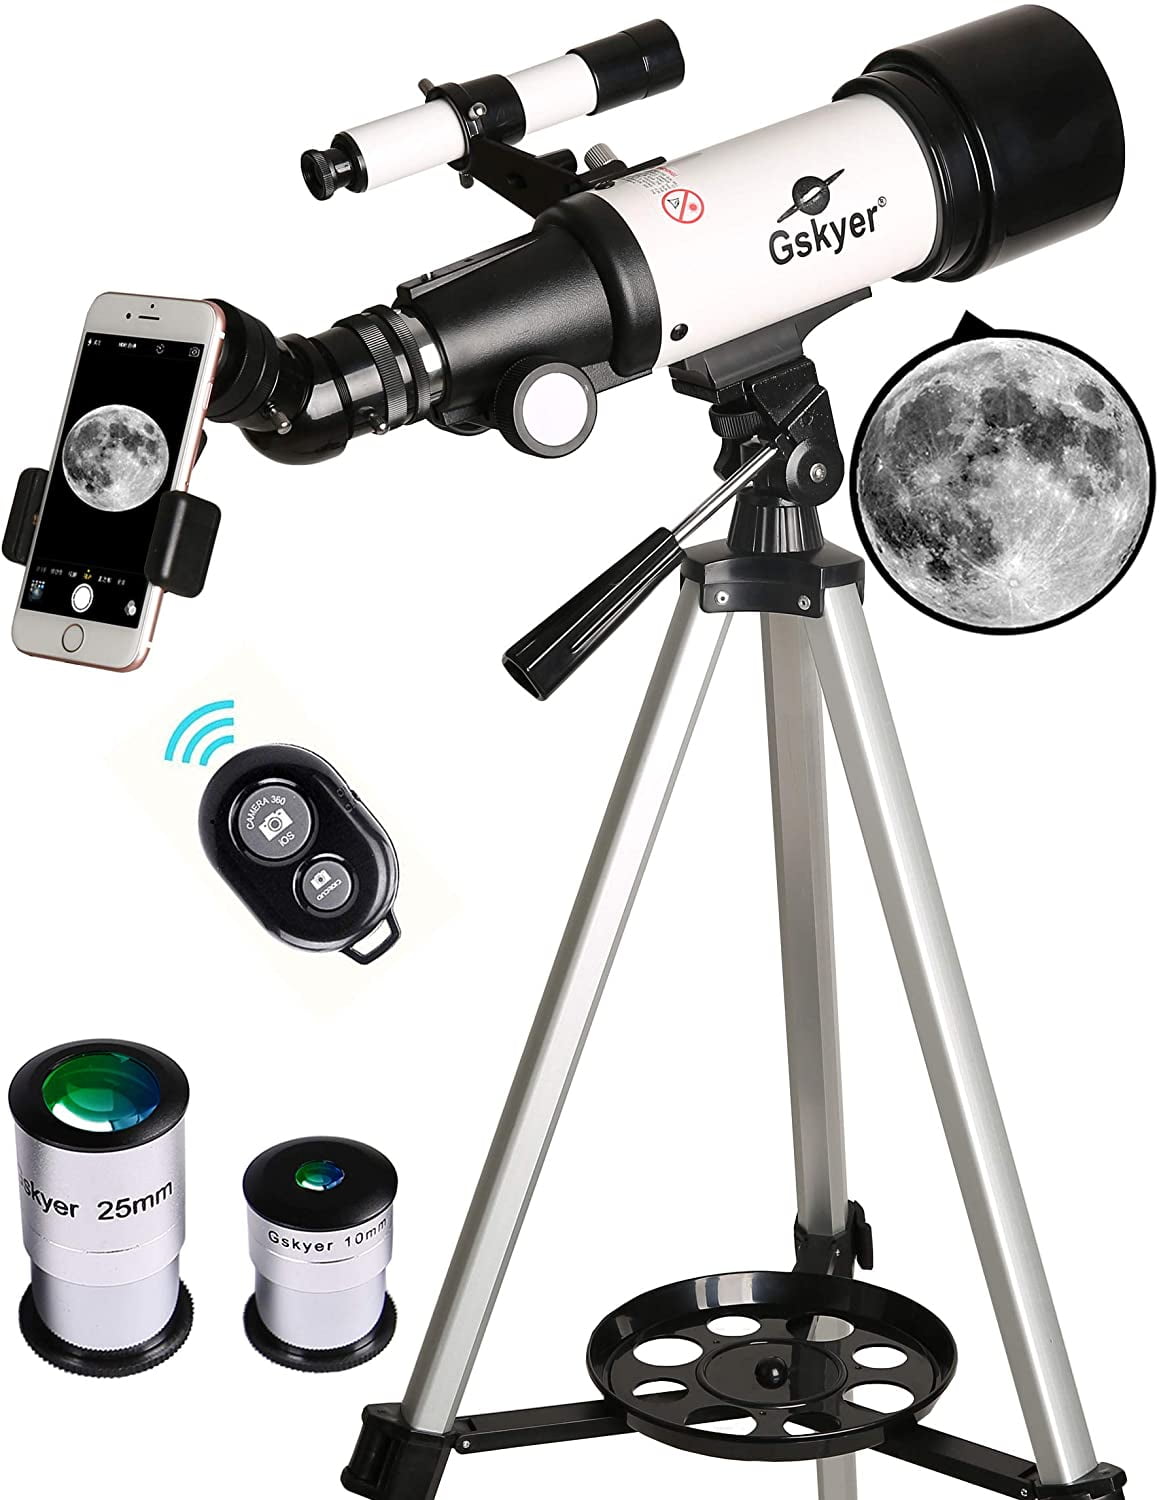 Astronomical Refractor Telescope Beginners Astronomy Telescope for Kids Adults Fully Multi-Coated Optics Compact and Portable Portable Travel with an Tripod Height Adjustable Mount,Backpack 